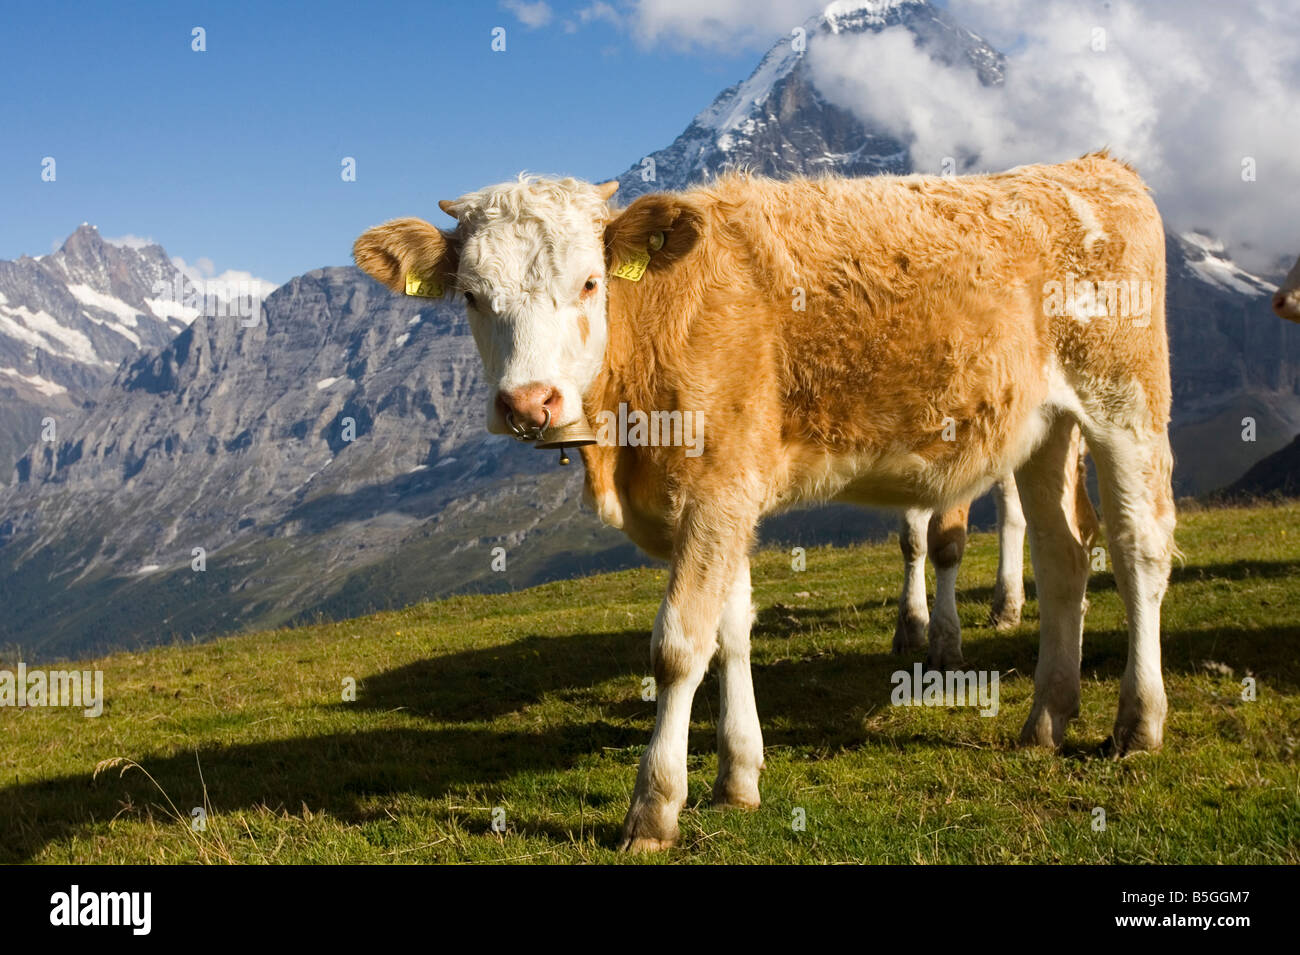 Alpine cow with the Eiger mountain in the background Switzerland Stock Photo